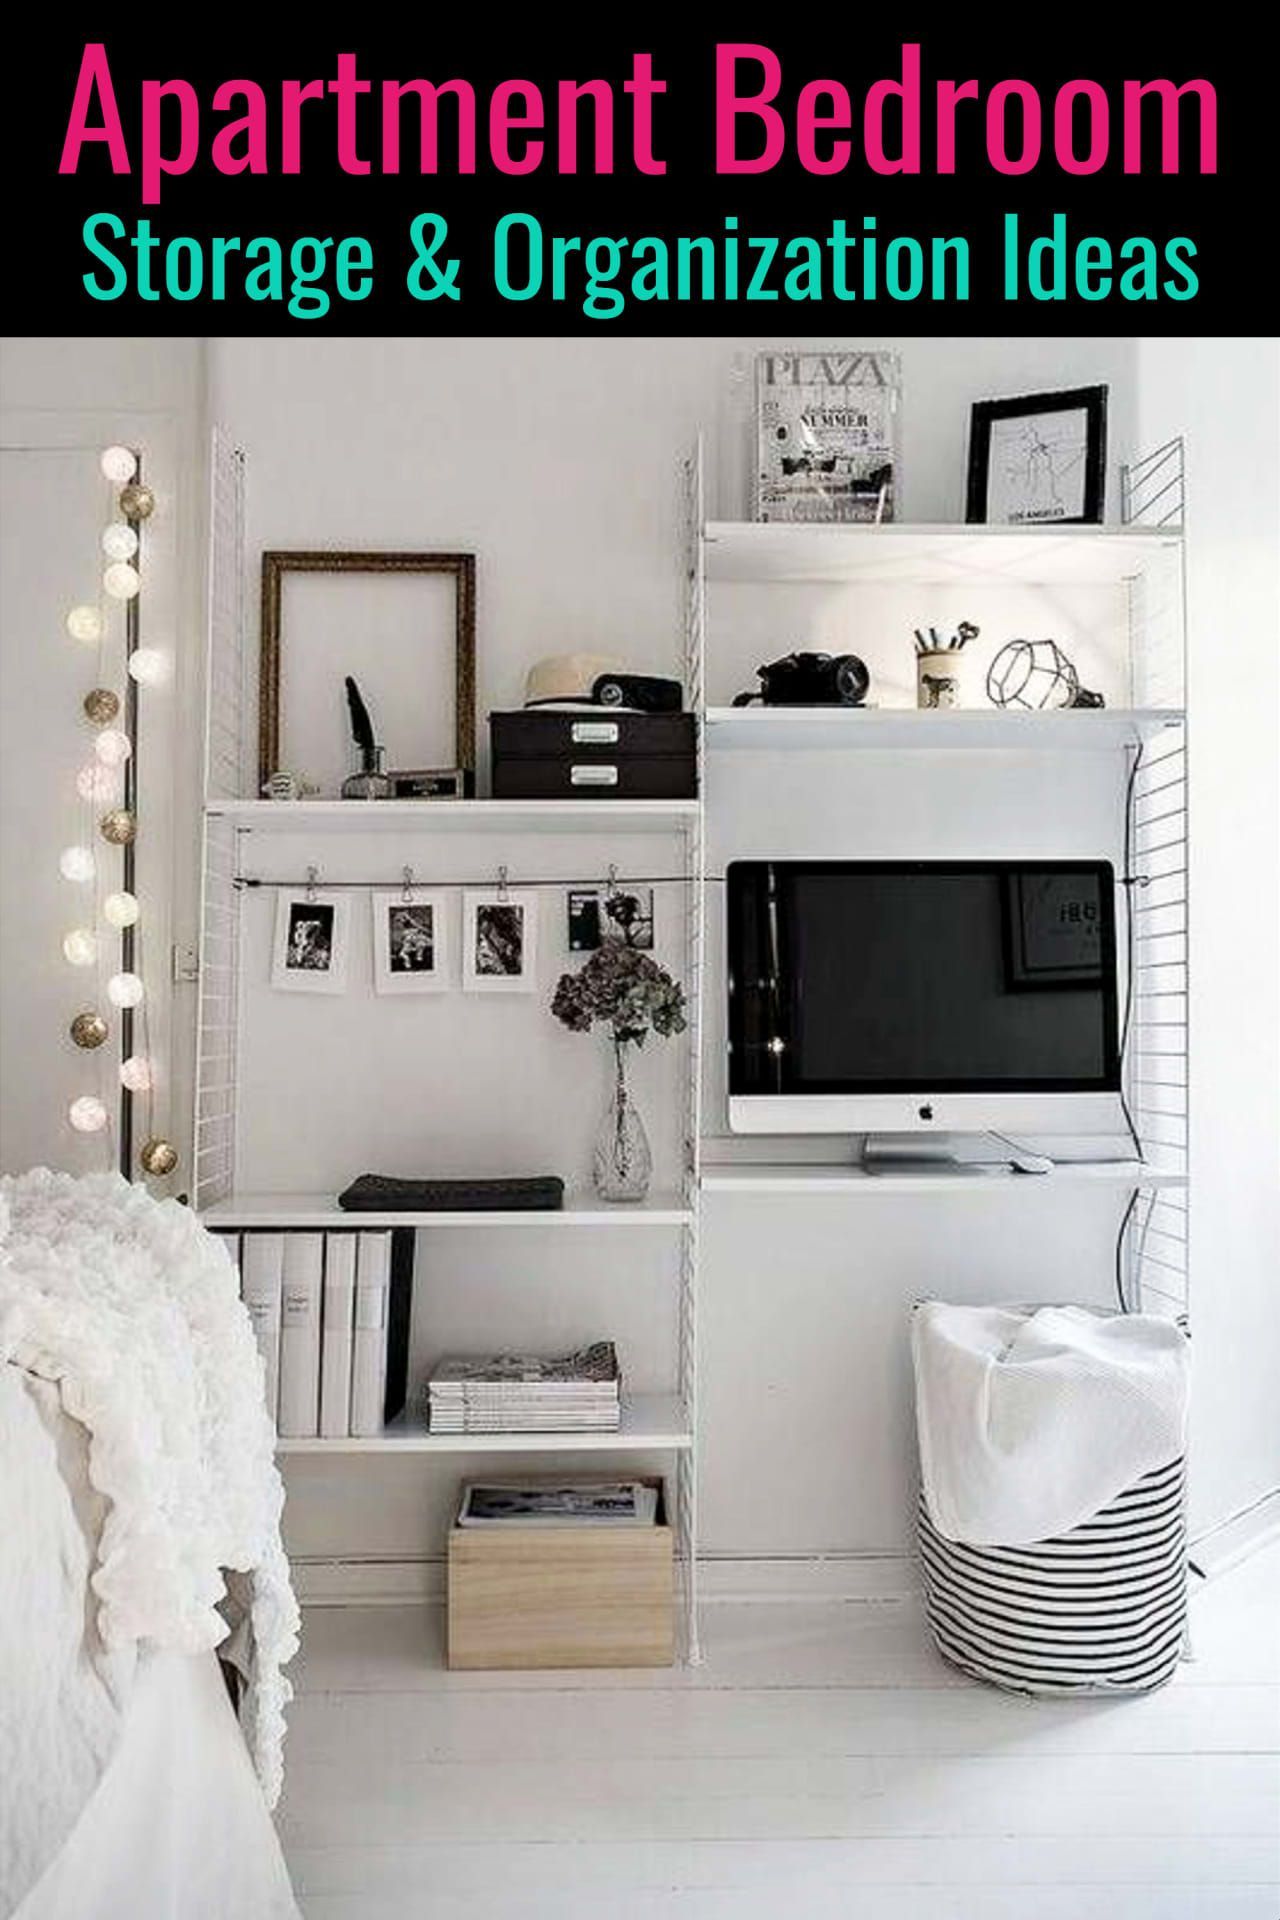 Small Bedroom Storage Hacks - Clever Storage Ideas for Small Bedrooms - Decluttering Your Life - Small Bedroom Storage Hacks - Clever Storage Ideas for Small Bedrooms - Decluttering Your Life -   12 diy Bedroom teenagers ideas